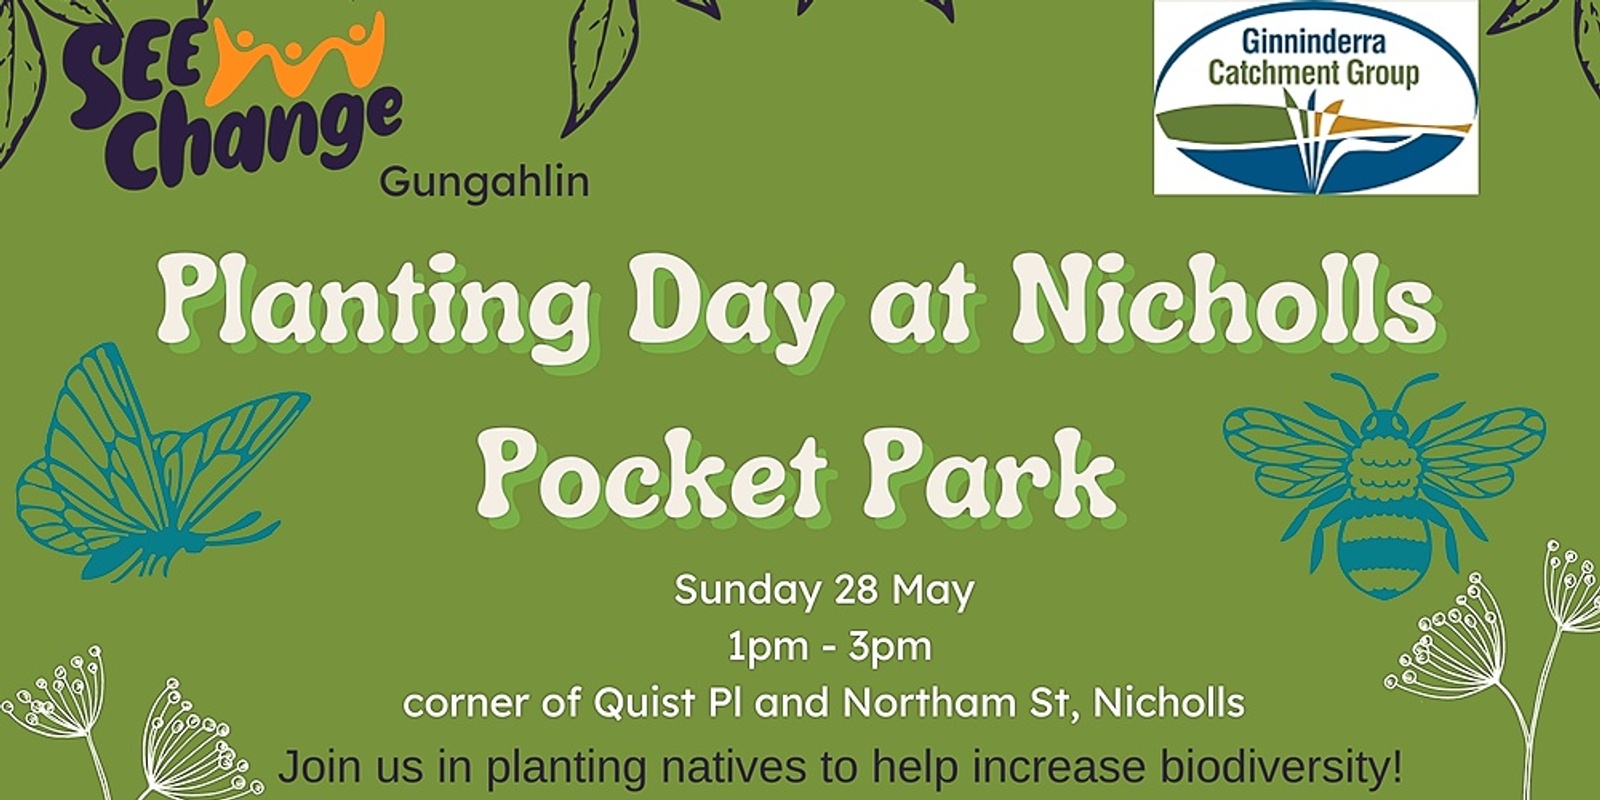 Banner image for Nicholls Planting Day